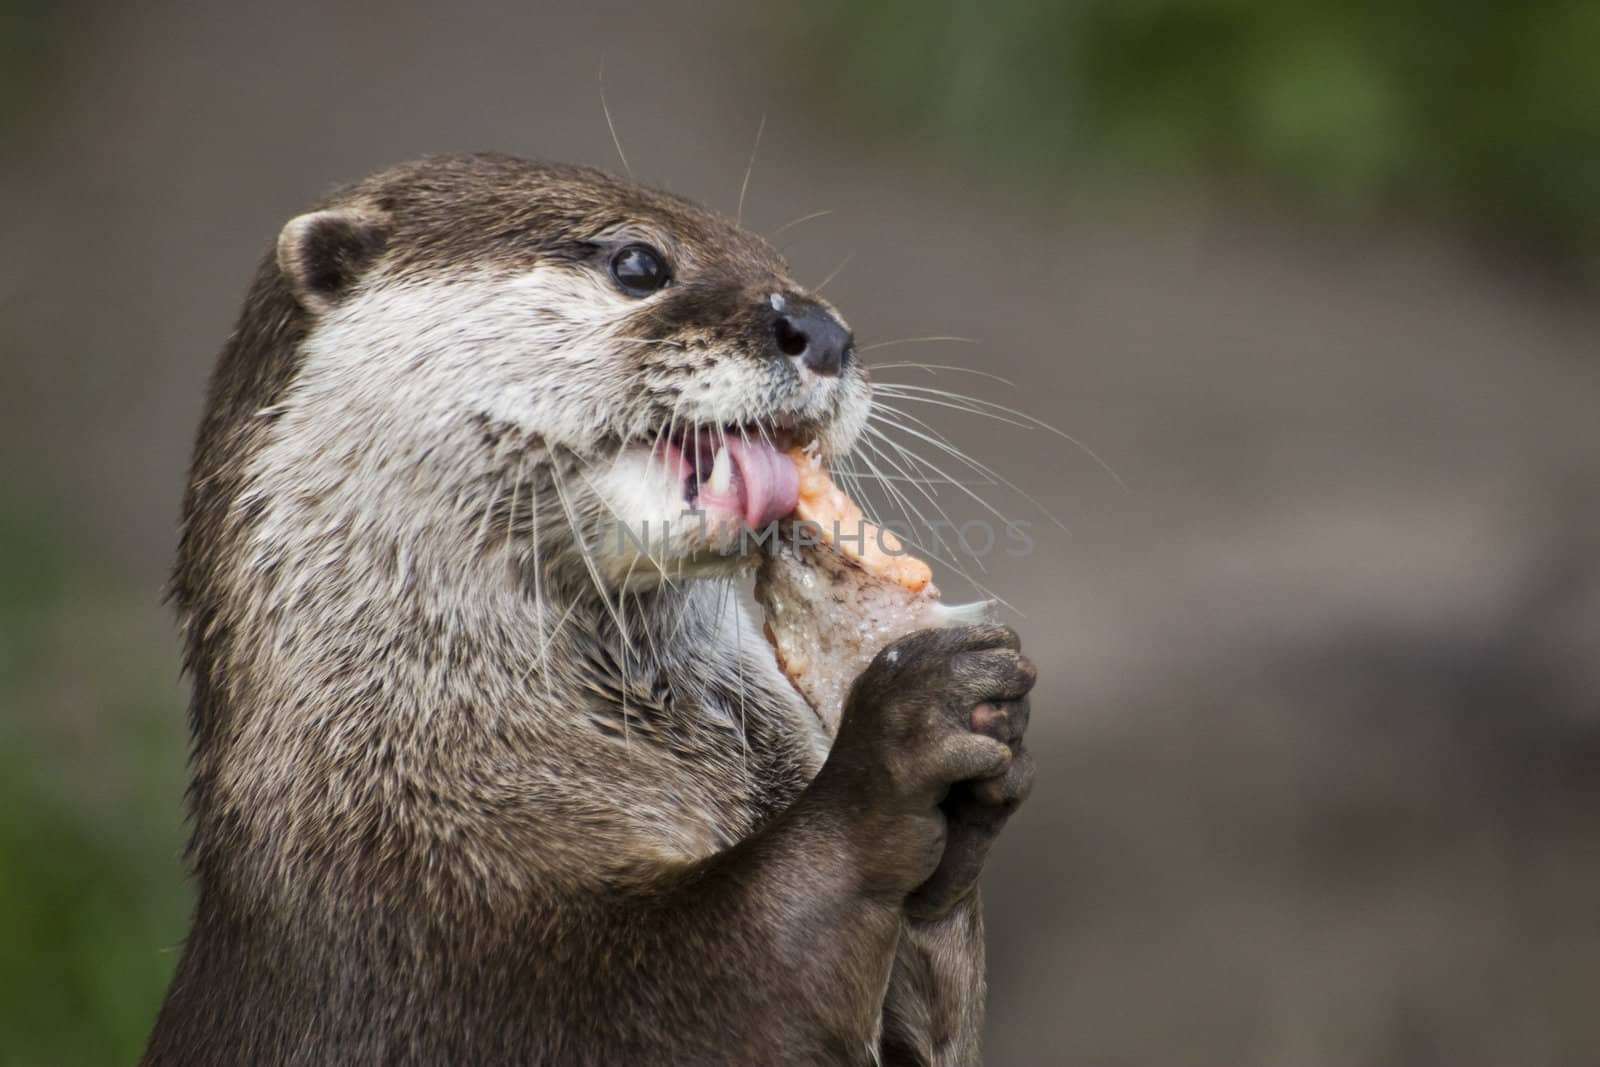 Portrait of an otter eating a fish